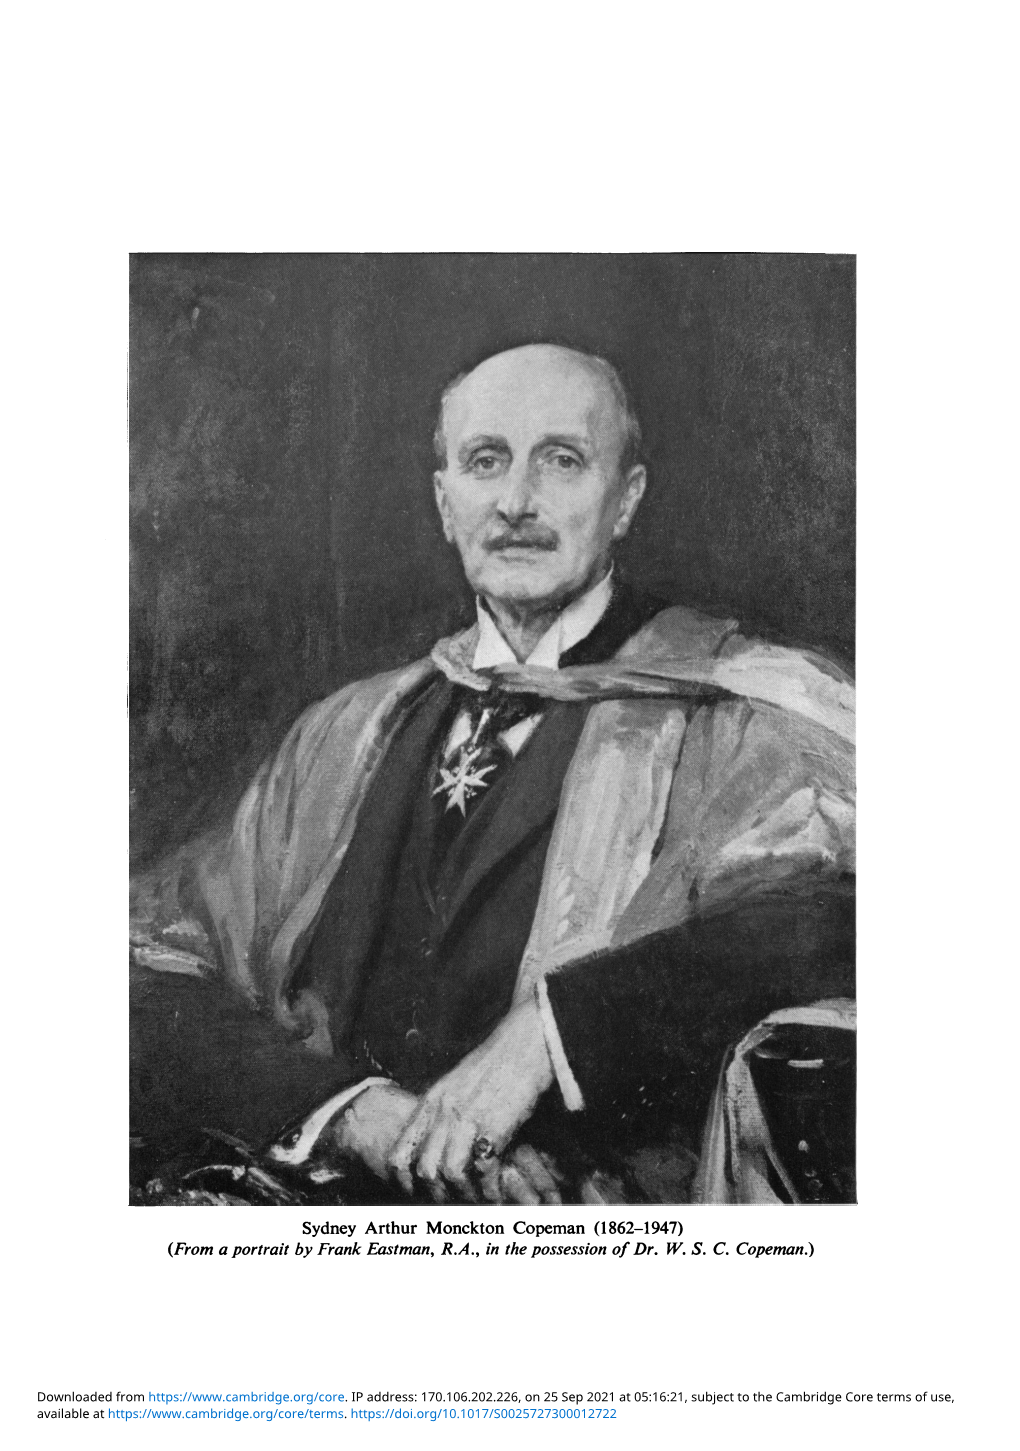 Sydney Arthur Monckton Copeman (1862-1947) (From a Portrait by Frank Eastman, R.A., in the Possession of Dr